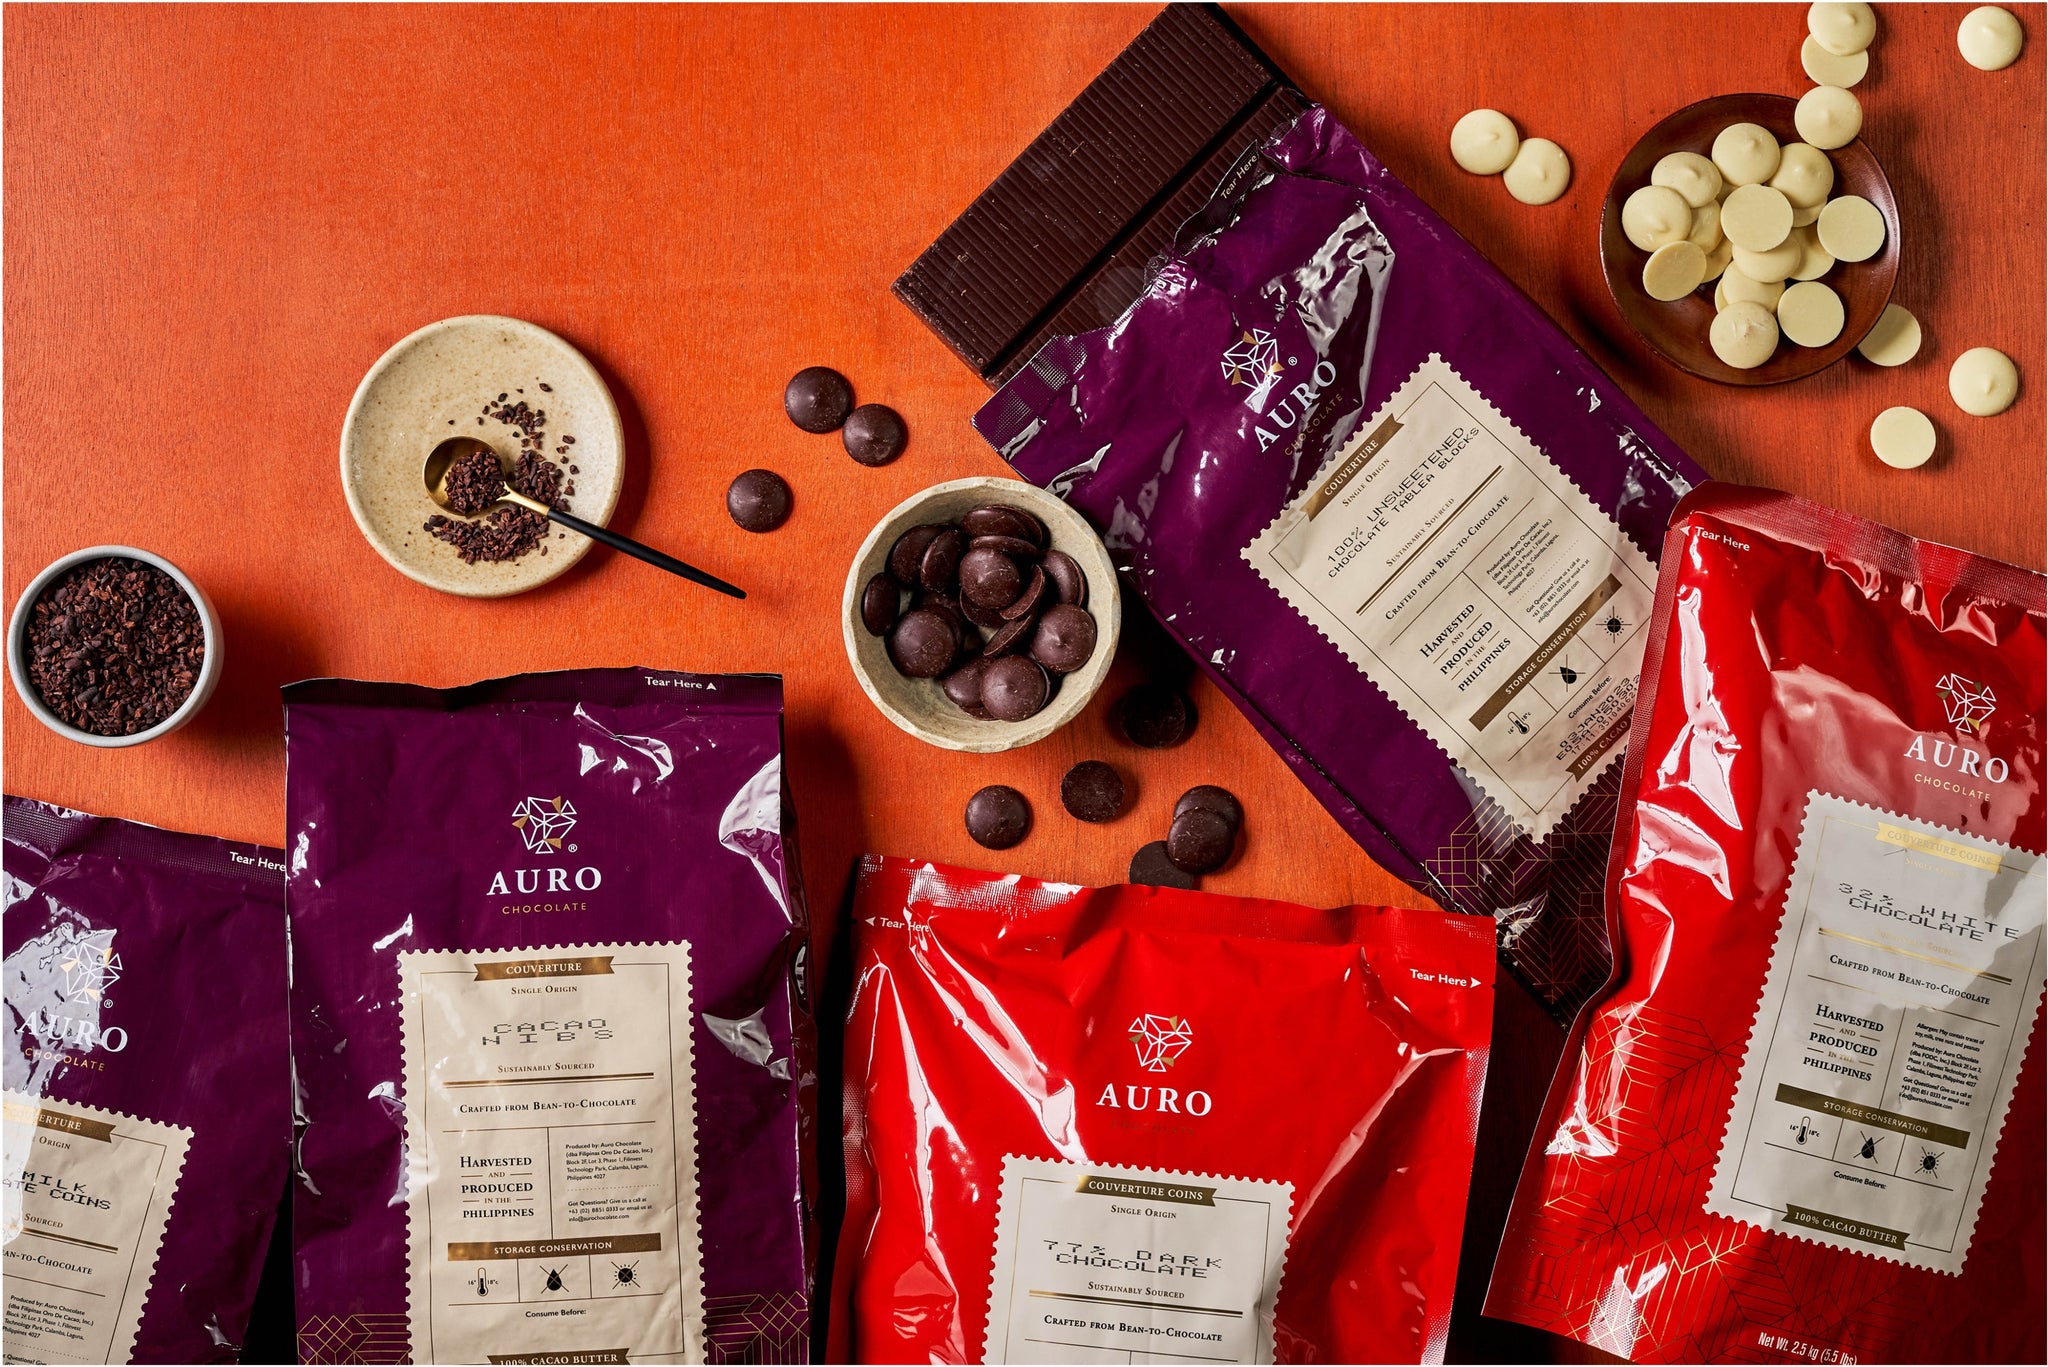 Auro Chocolate and Cacao Ingredients